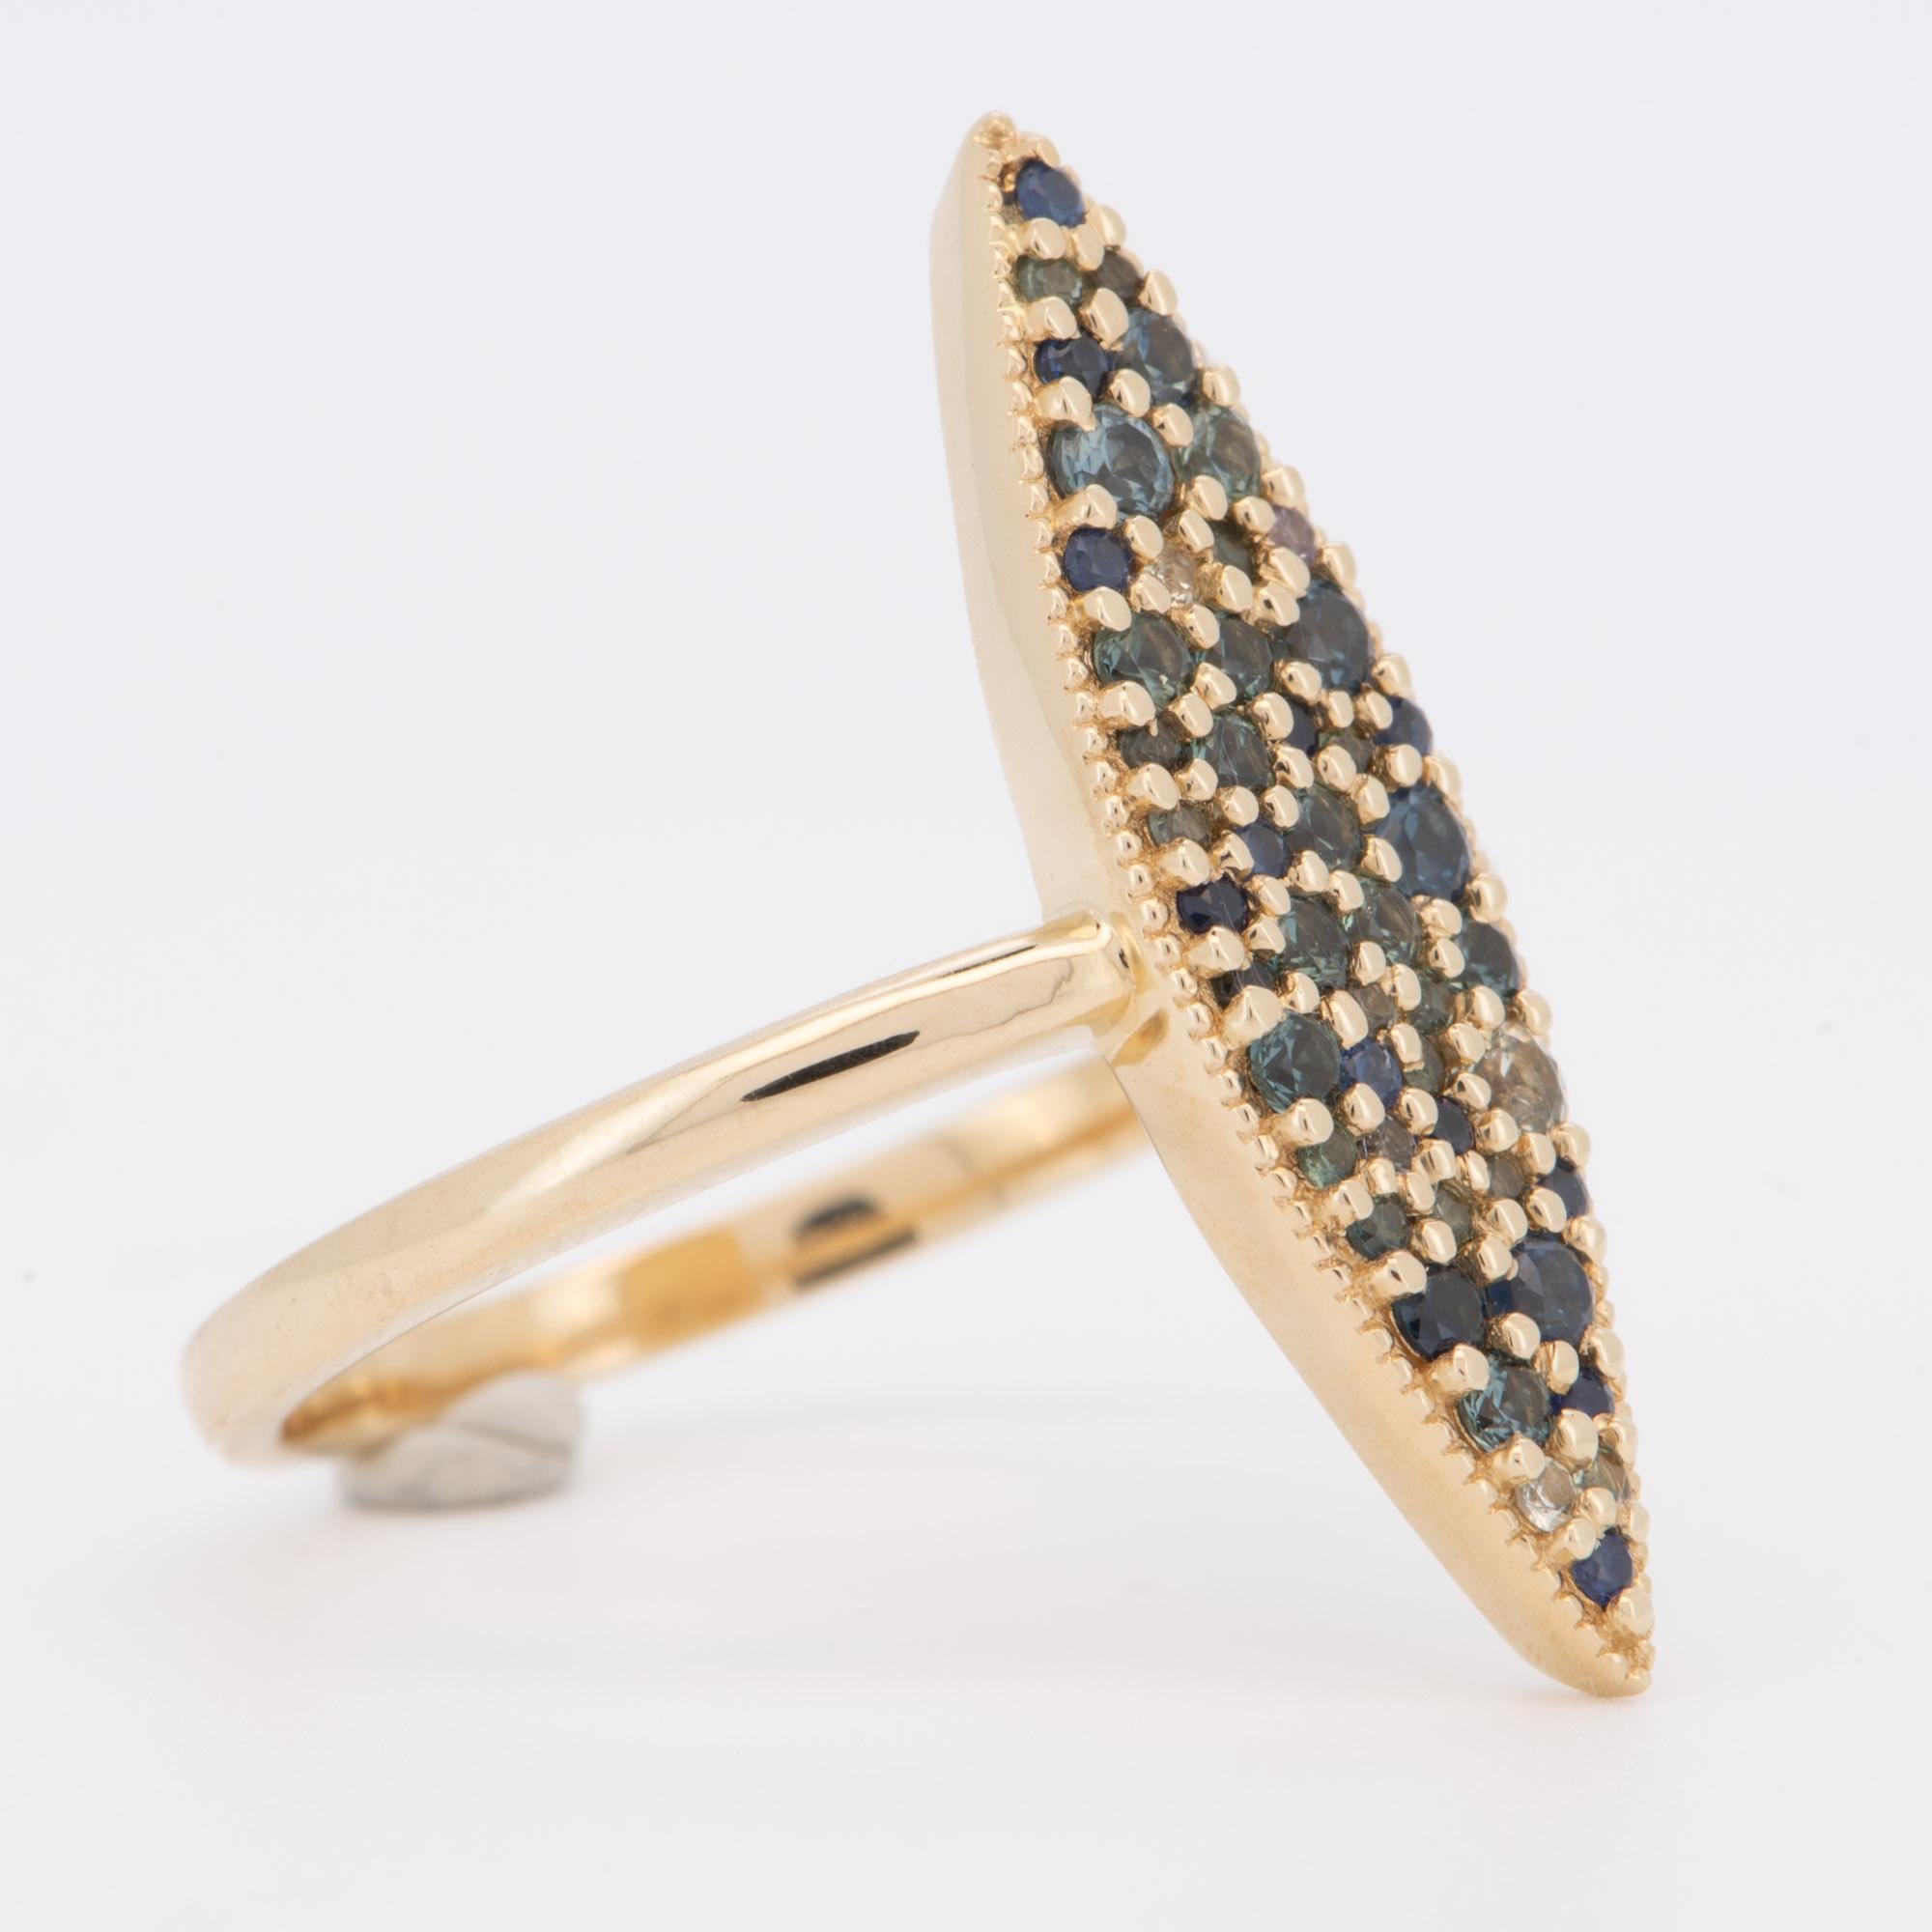 ♥ Stunning elongated navette ring set with a cluster of multi-color sapphires, ranging from light yellow, green, teal blue, to dark blue; a delicate milgrain edge dots the outline of the setting for a vintage effect.
♥ The setting measures 24.3mm in